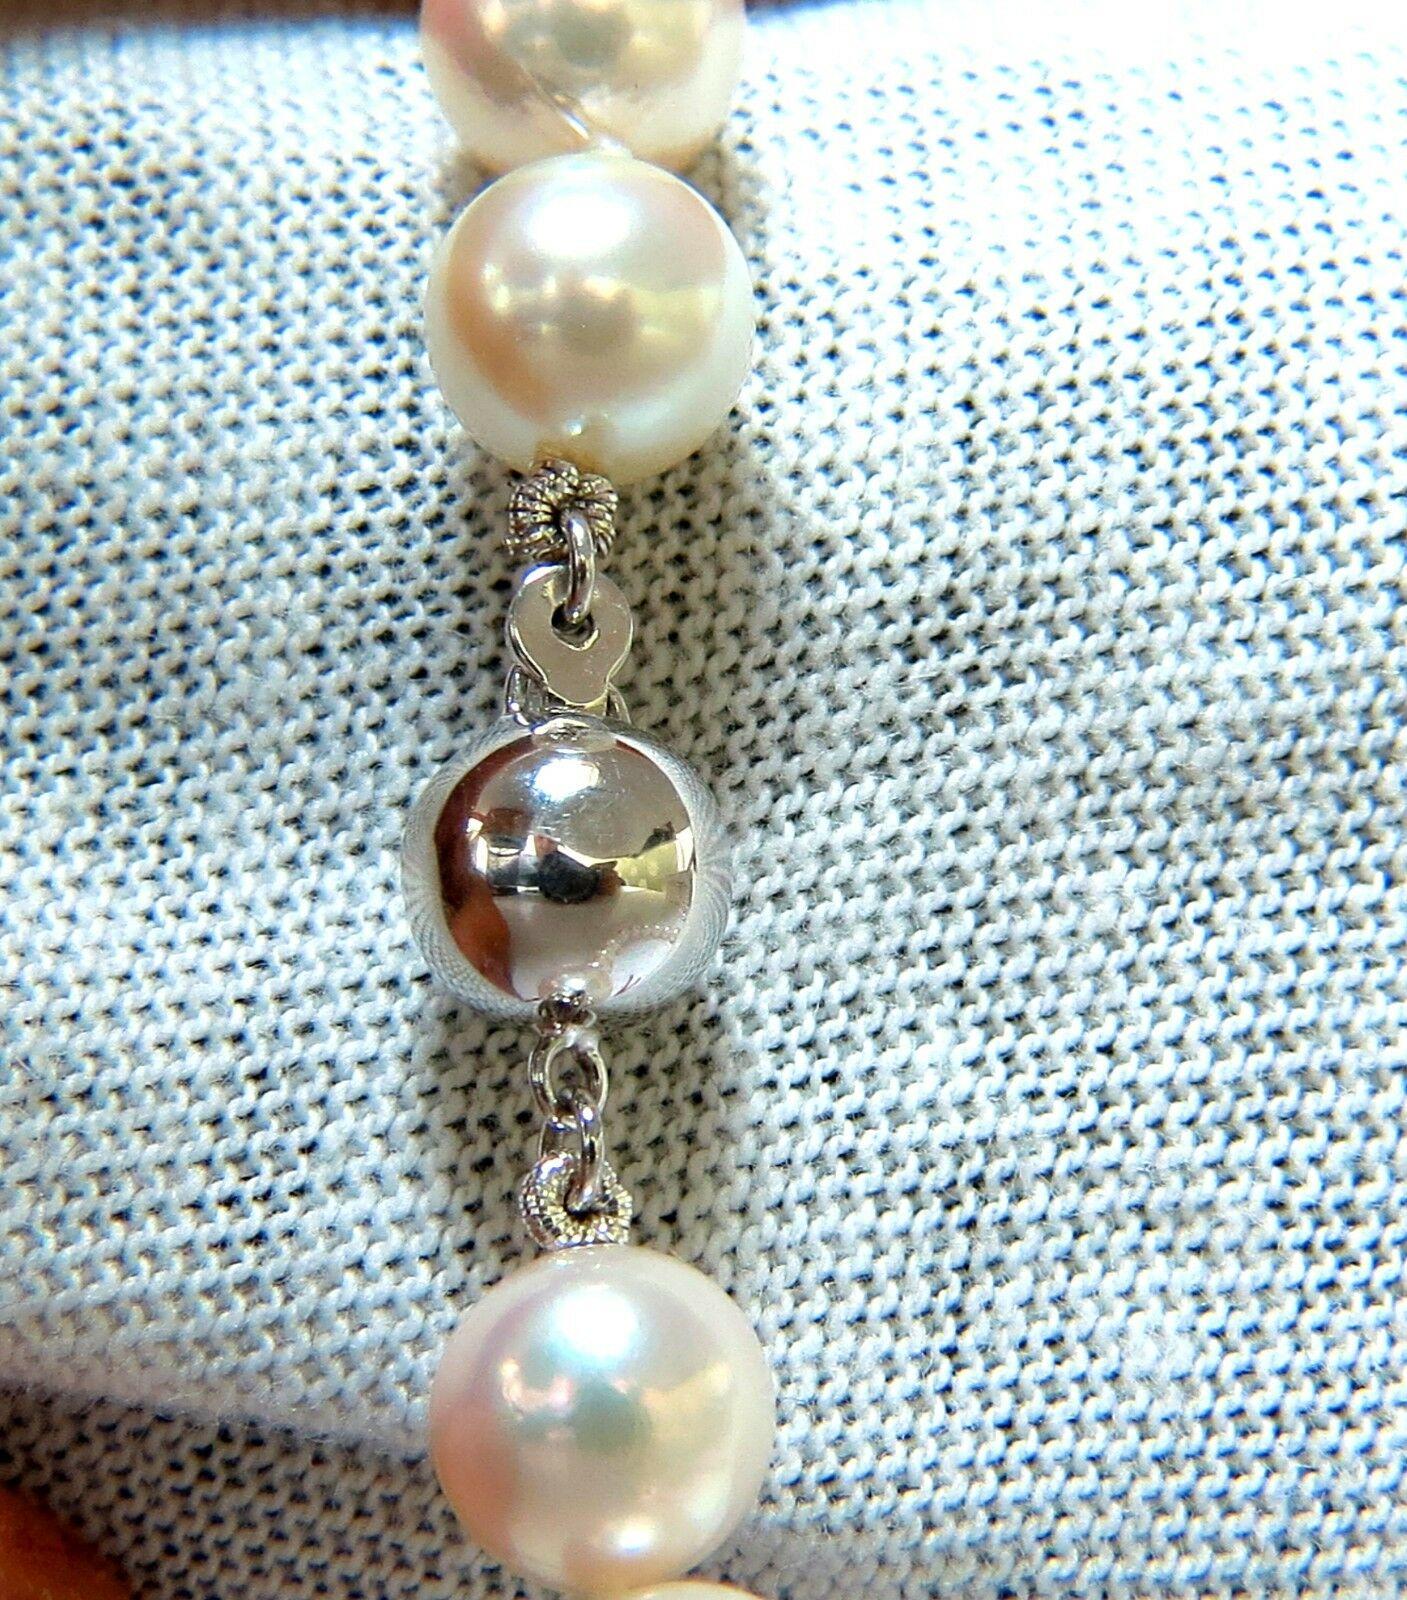 GIA Akoya's

The Natural Pinctada Fucata (Akoya Pearl Oyster)

Report: 2155942685

Saltwater

White & slight, slight pink overtone

8.50 - 8.00mm

14kt. white gold ball clasp

41 grams total weight

18 Inches

51 Pearls

$9500 Appraisal Certificate